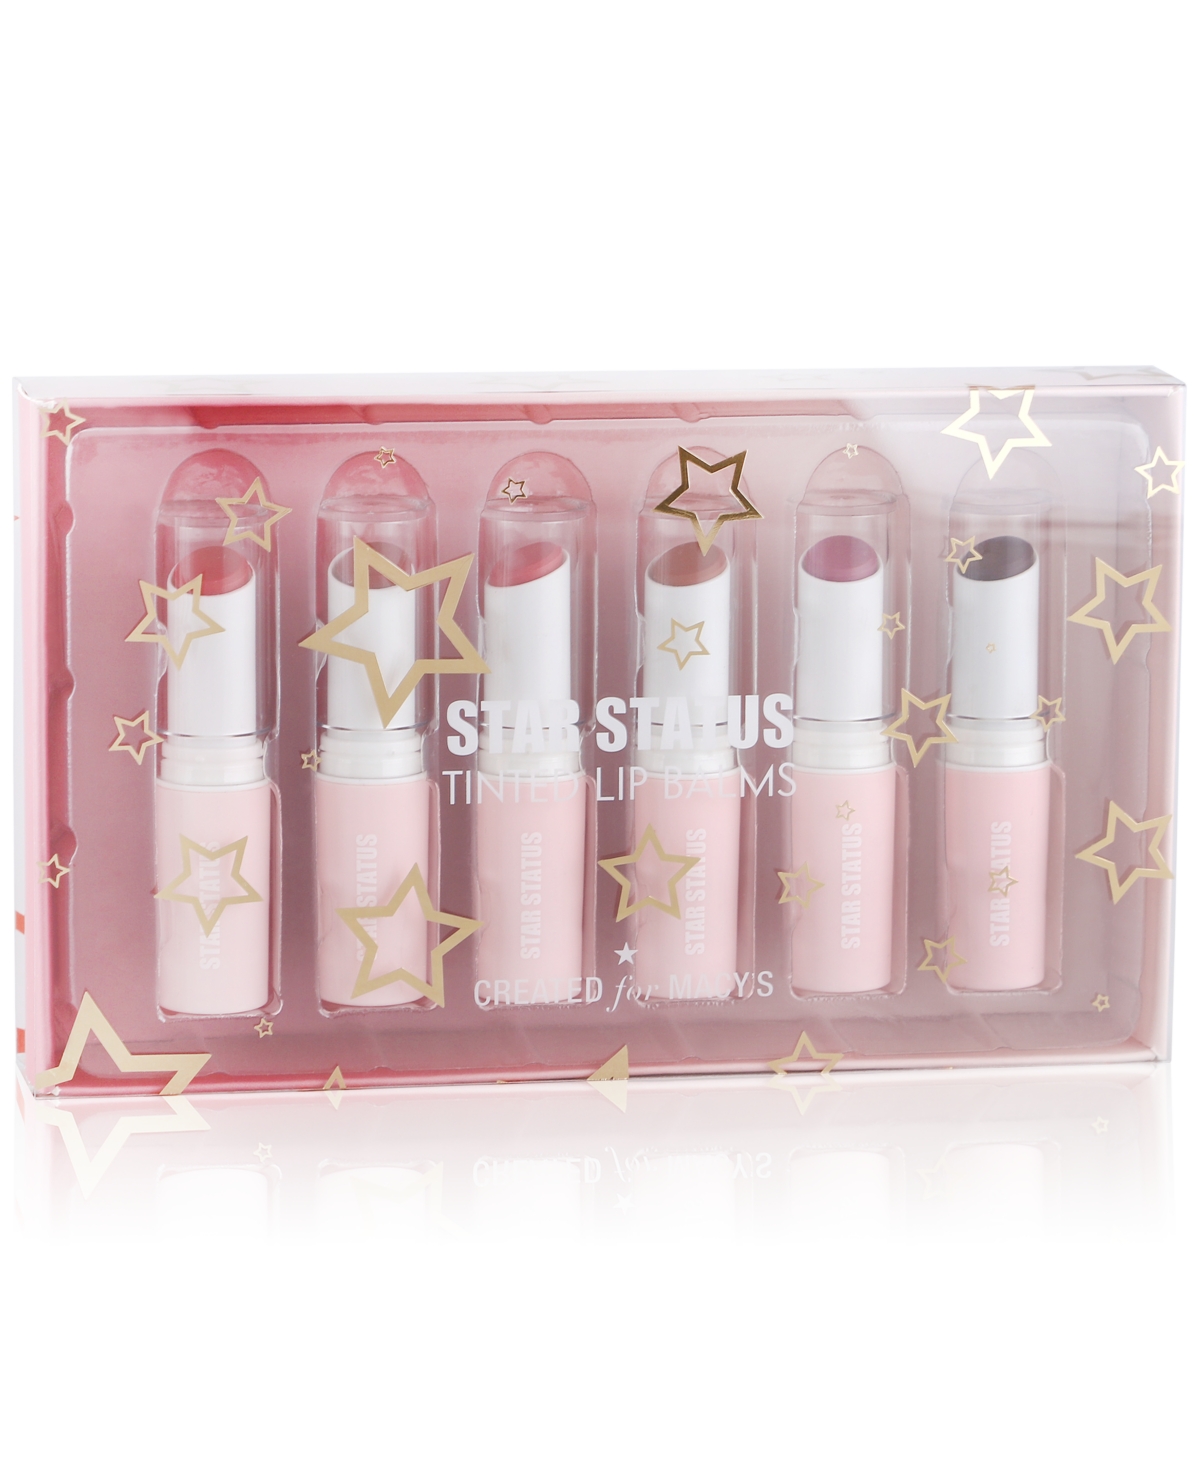 Shop Created For Macy's 6-pc. Star Status Tinted Lip Balms Set,  In No Color